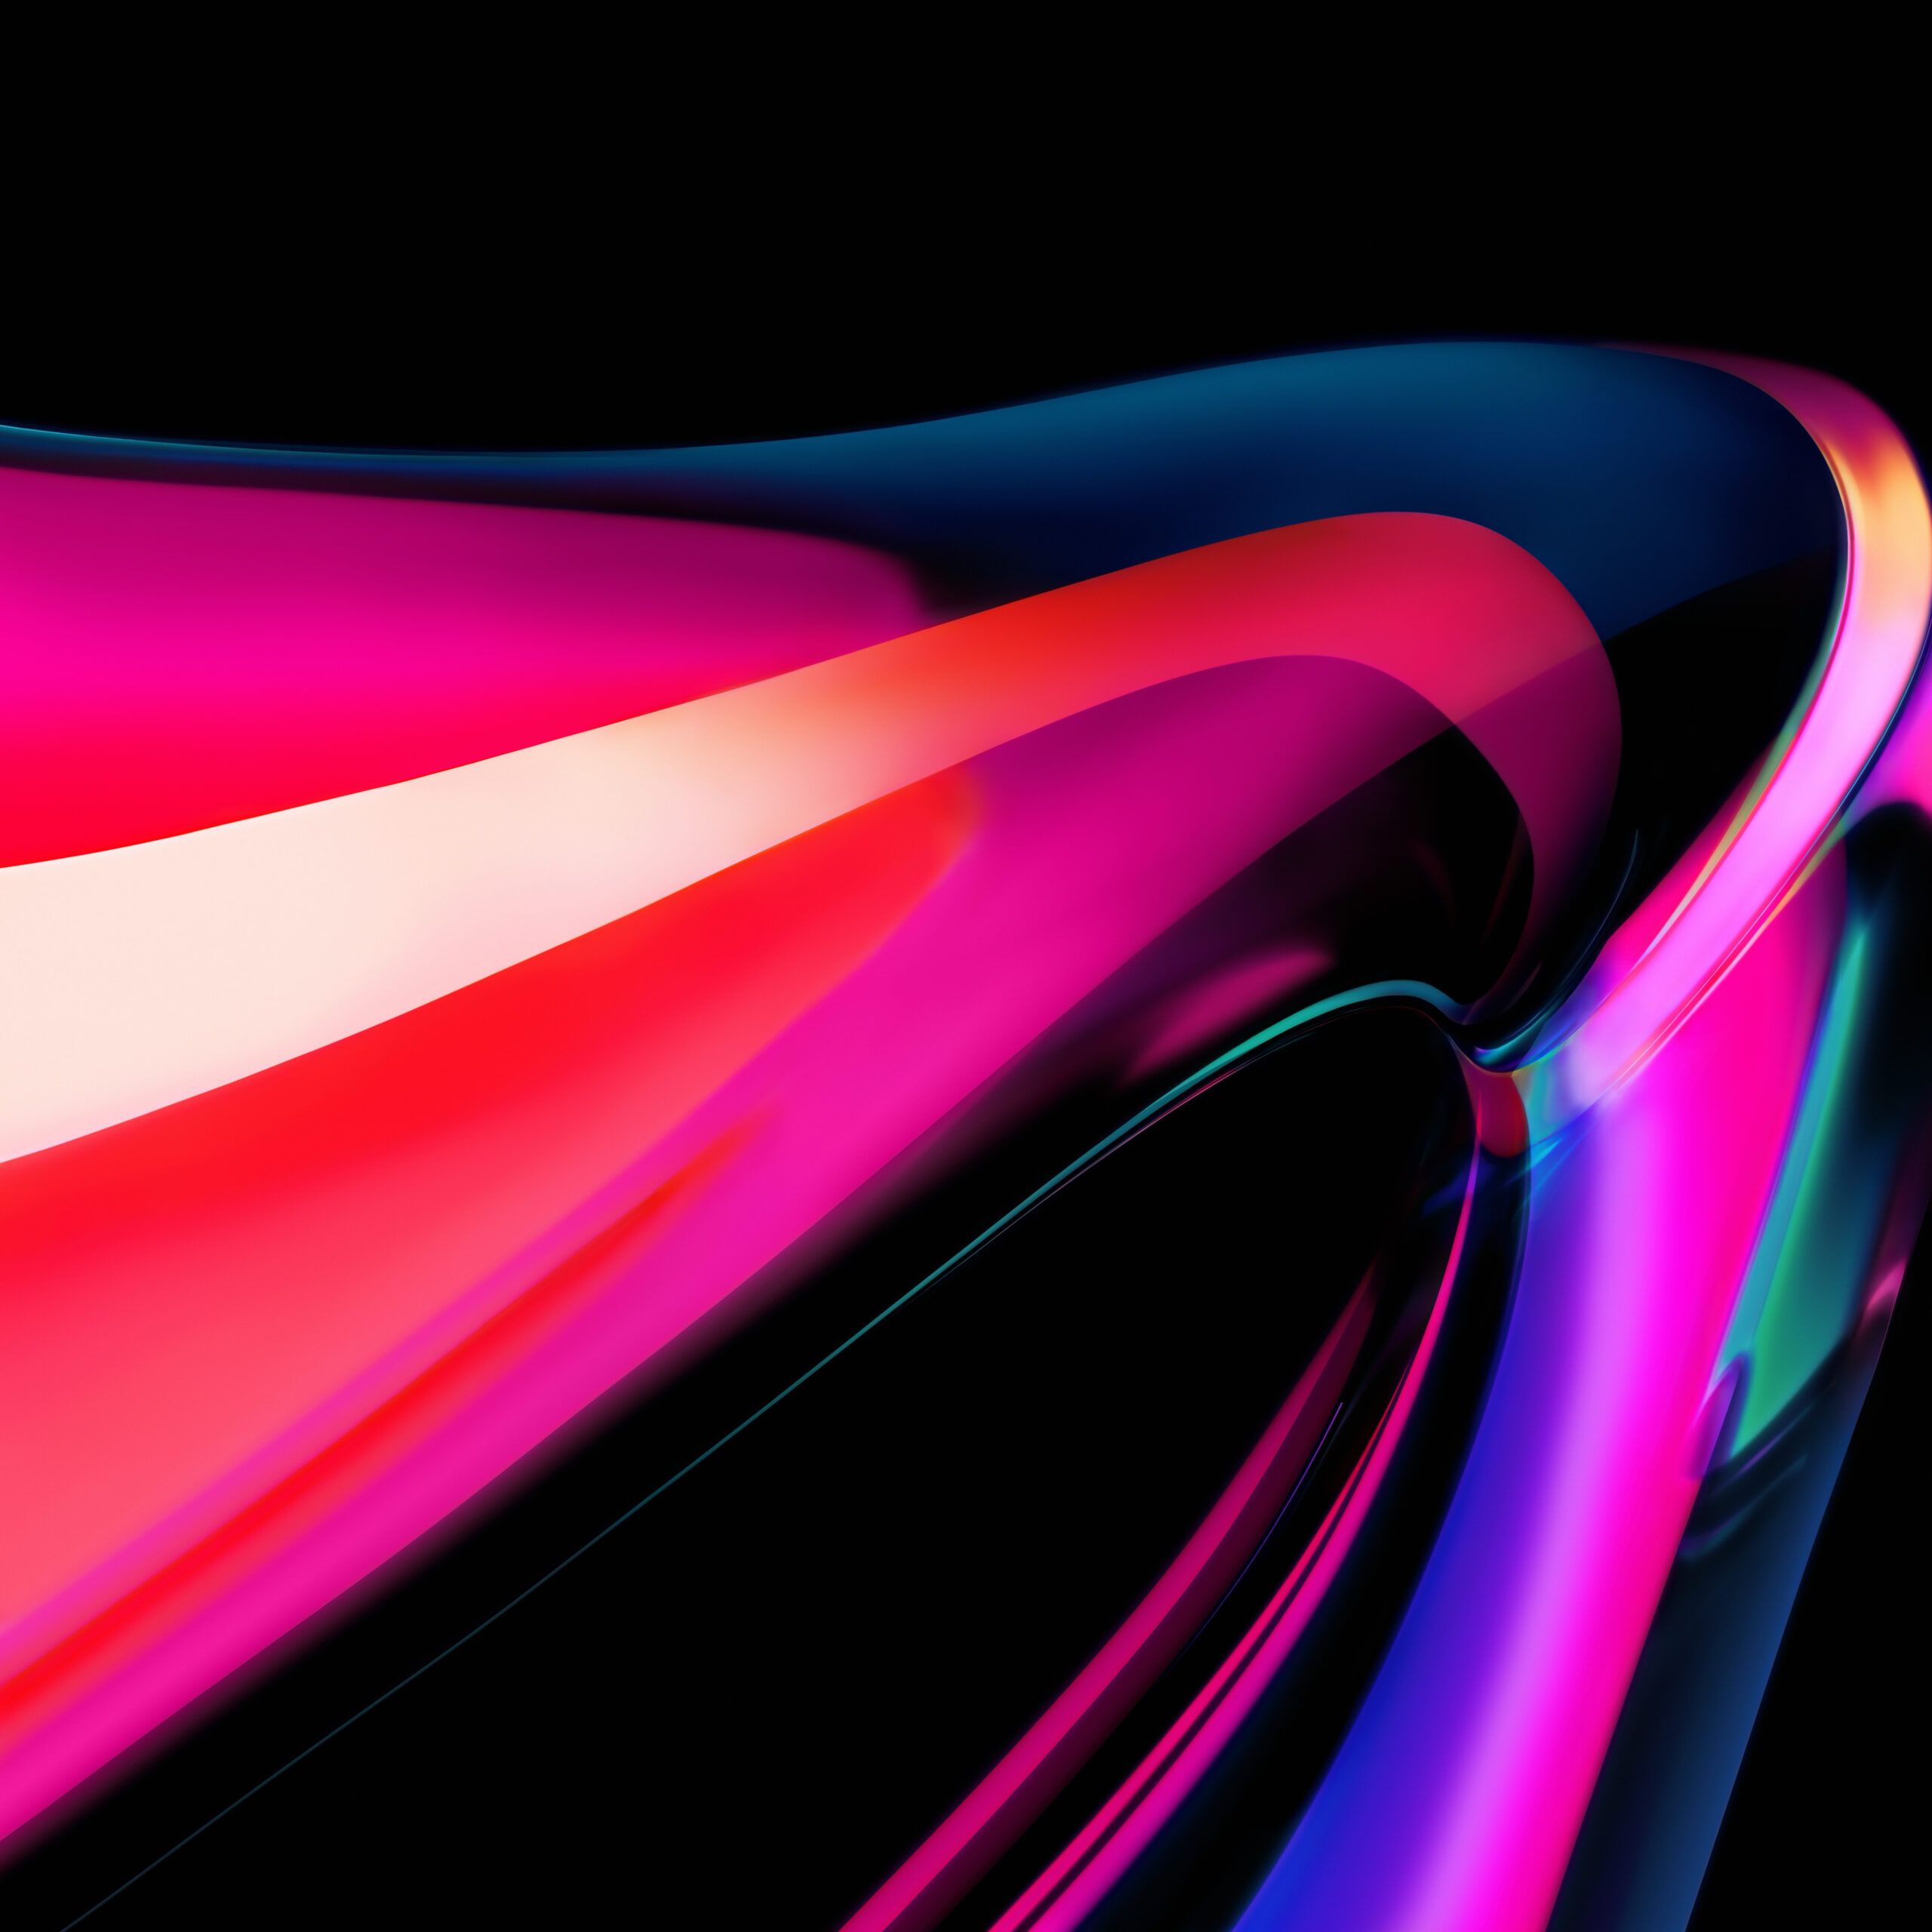 Download the official Apple M1 wallpaper here